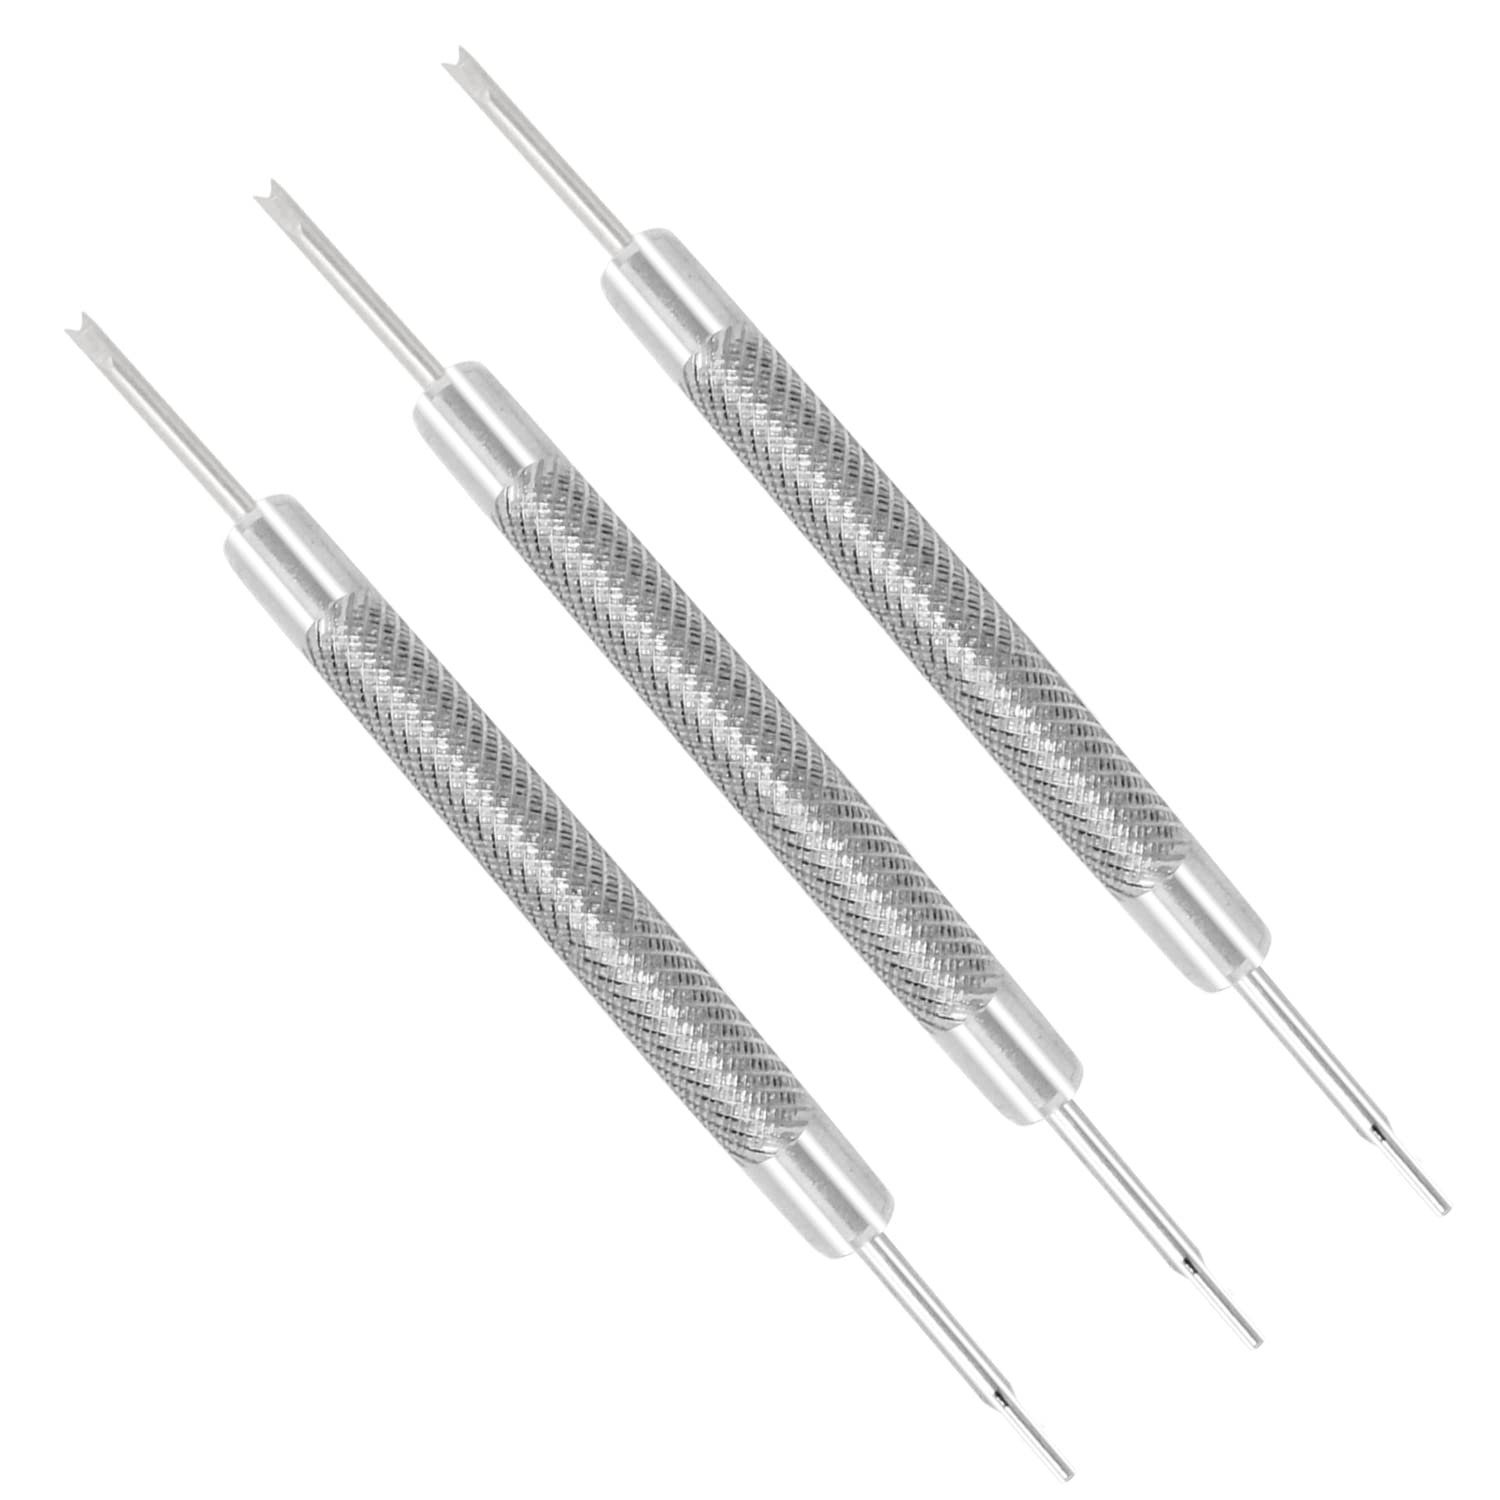 Honbay 3PCS Double Tip Pins Tools Spring Bar Tools for Watch Wrist Strap Removal Repair Fix Kit Tool